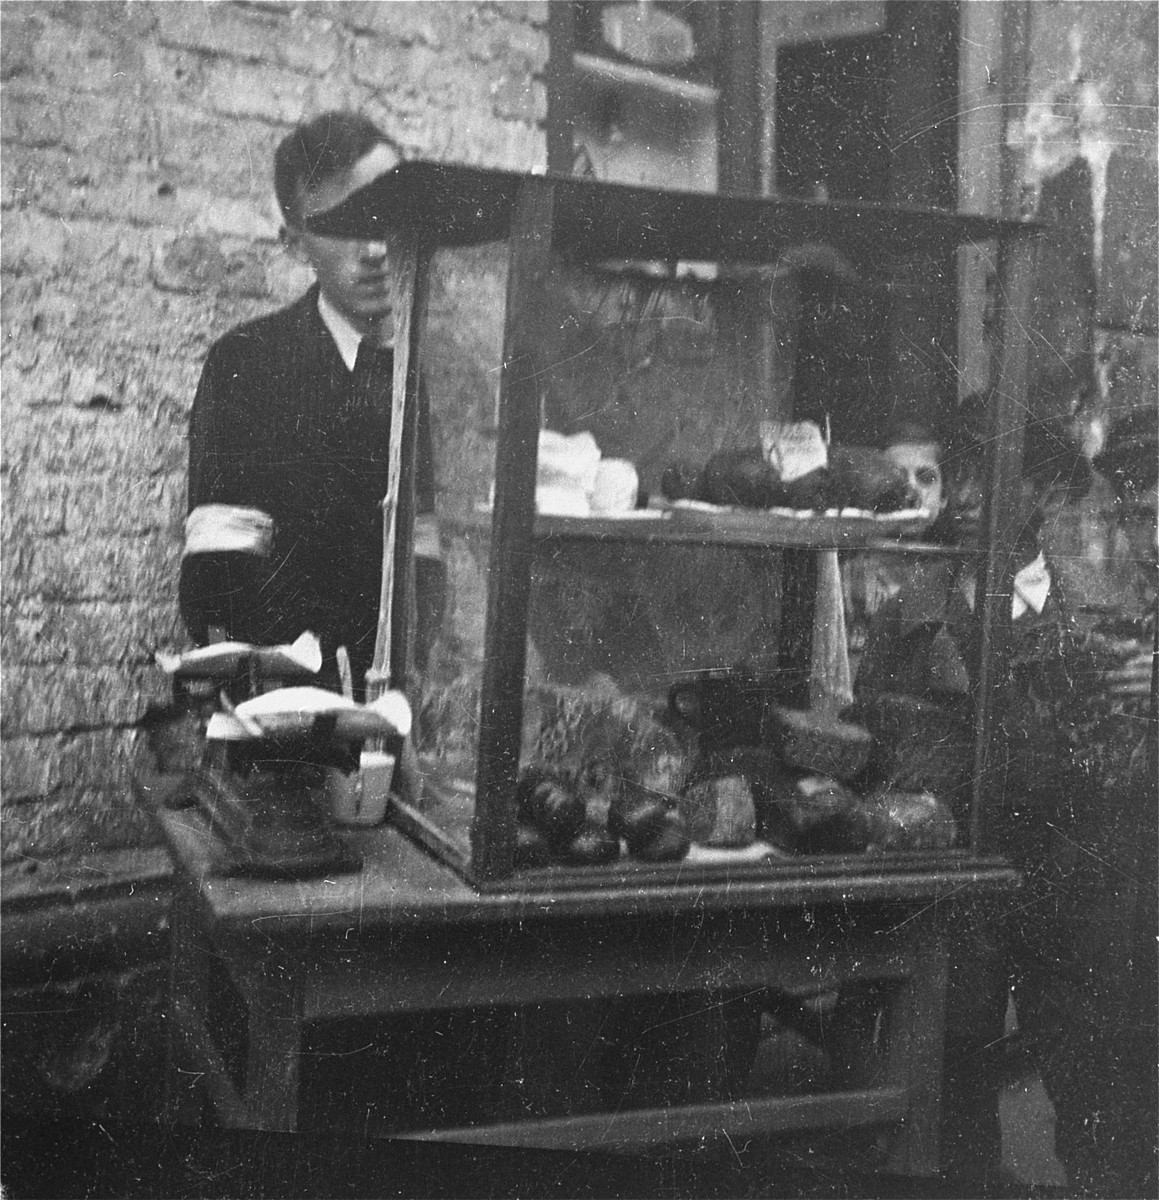 A vendor on the street in the Warsaw ghetto offers bread and cheese for sale. 

Joest's original caption reads: "This man sold bread and cheese on the street.  Children surrounded his glass case, but could not buy anything."